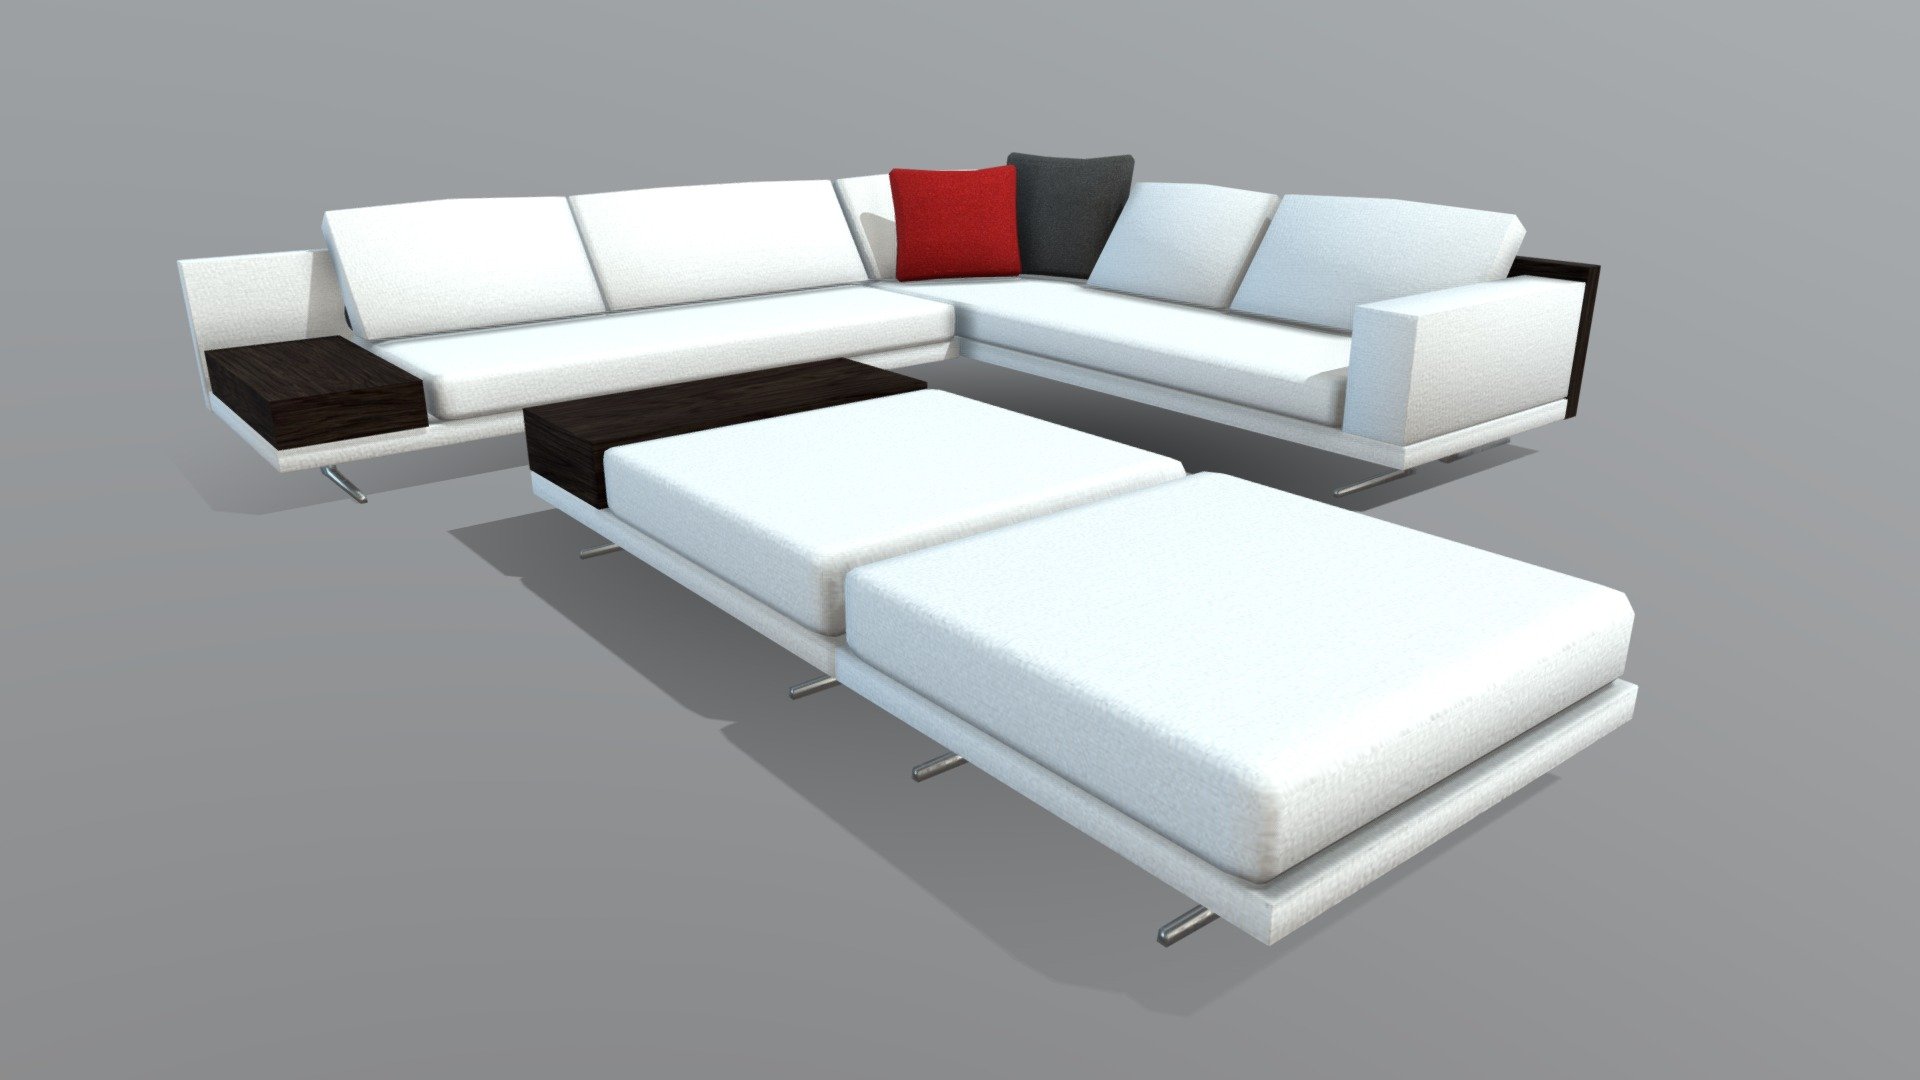 Nice low-poly realistic model of sofa with ottoman. Sofa and adjoining furniture are made in modern style and laconic colors that suitable for AR/VR engineering, game or advertising. Files units are centimeters and all models are exactly scaled to represent real-life object's dimensions 3d model